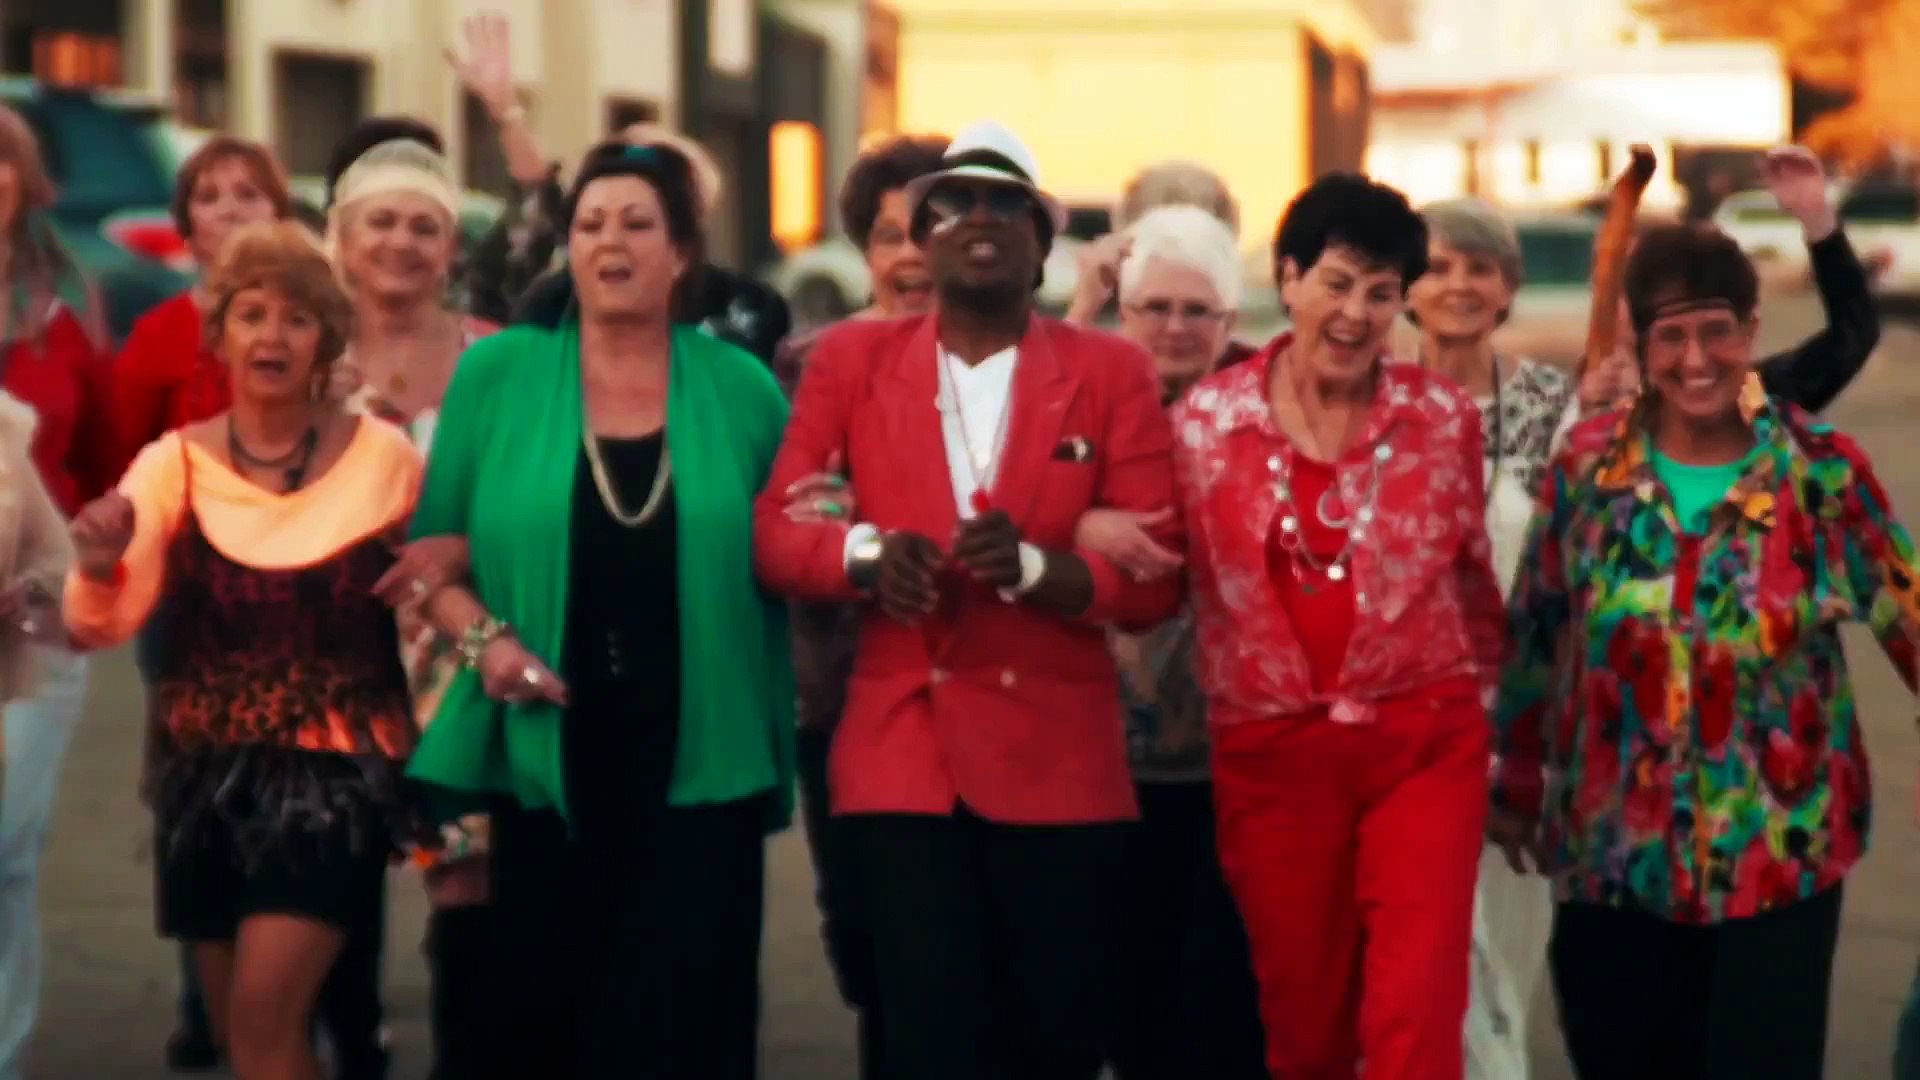 Uptown Funk covers by Grannies and seniors : Mark Ronson ft. Bruno Mars Oldtown Cover ft. The Dancin